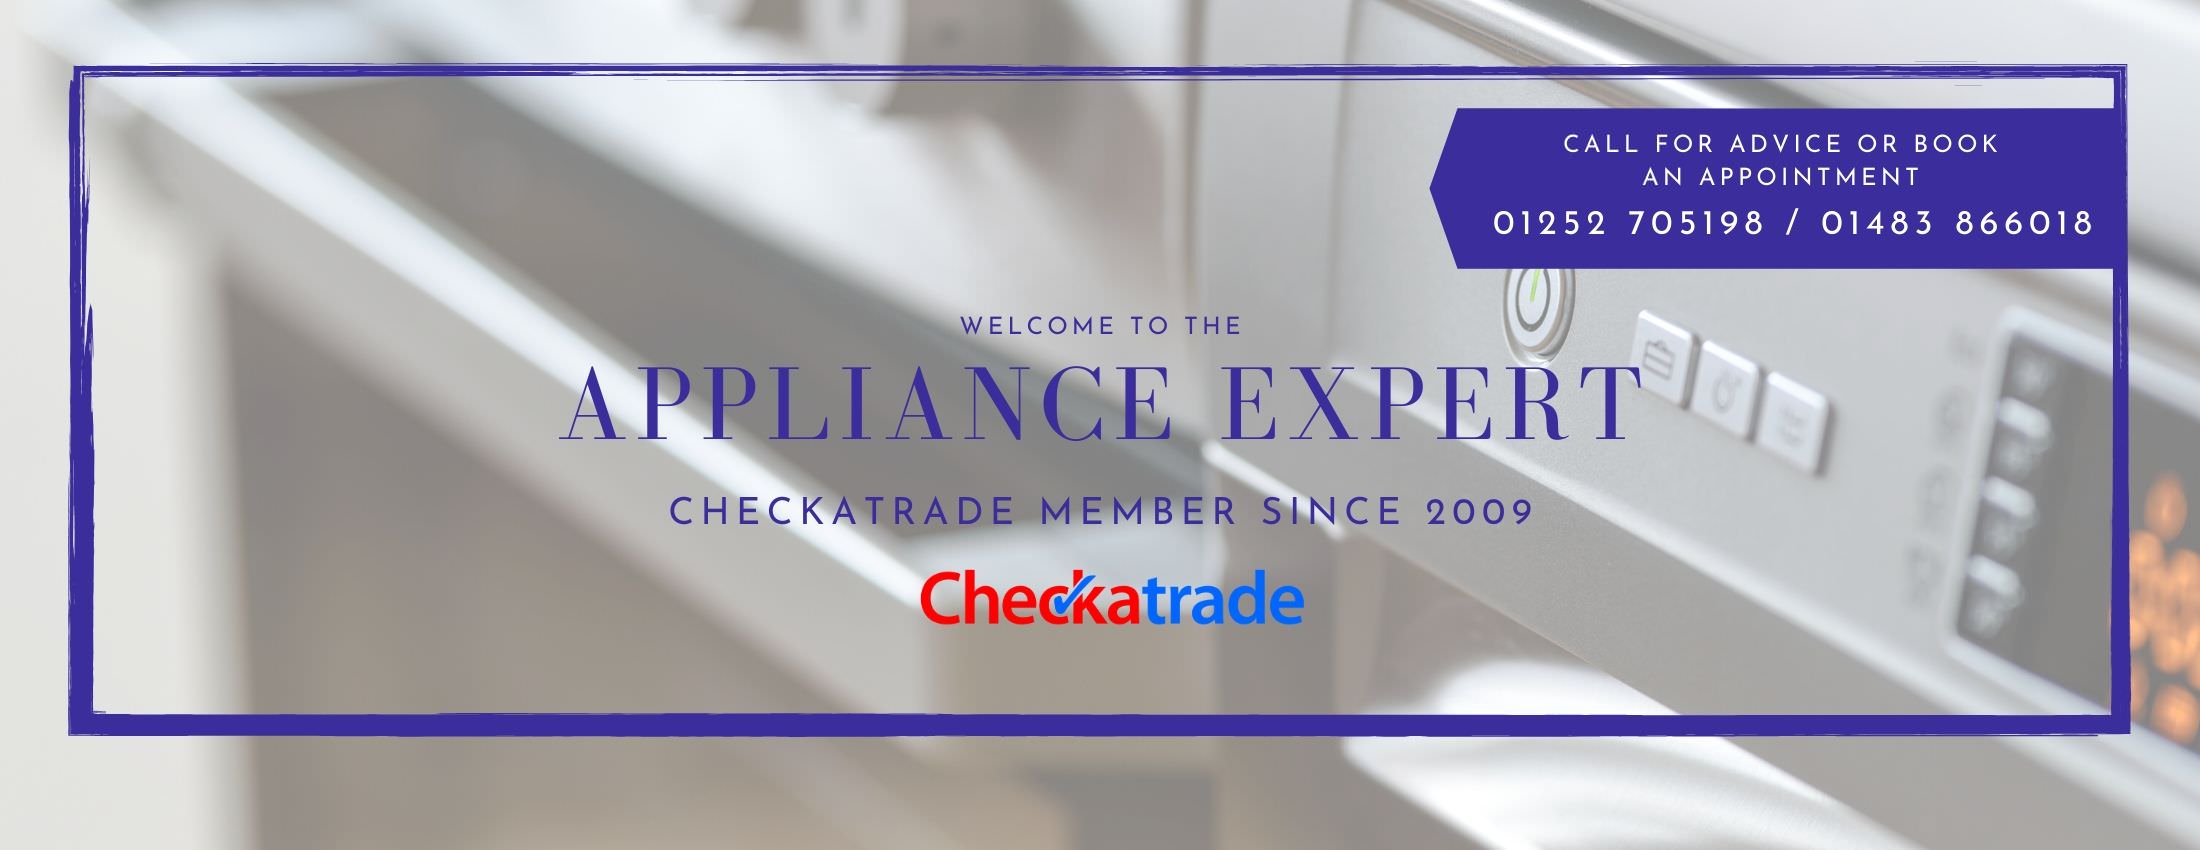 Appliance Expert Domestic is a trusted member of Checkatrade